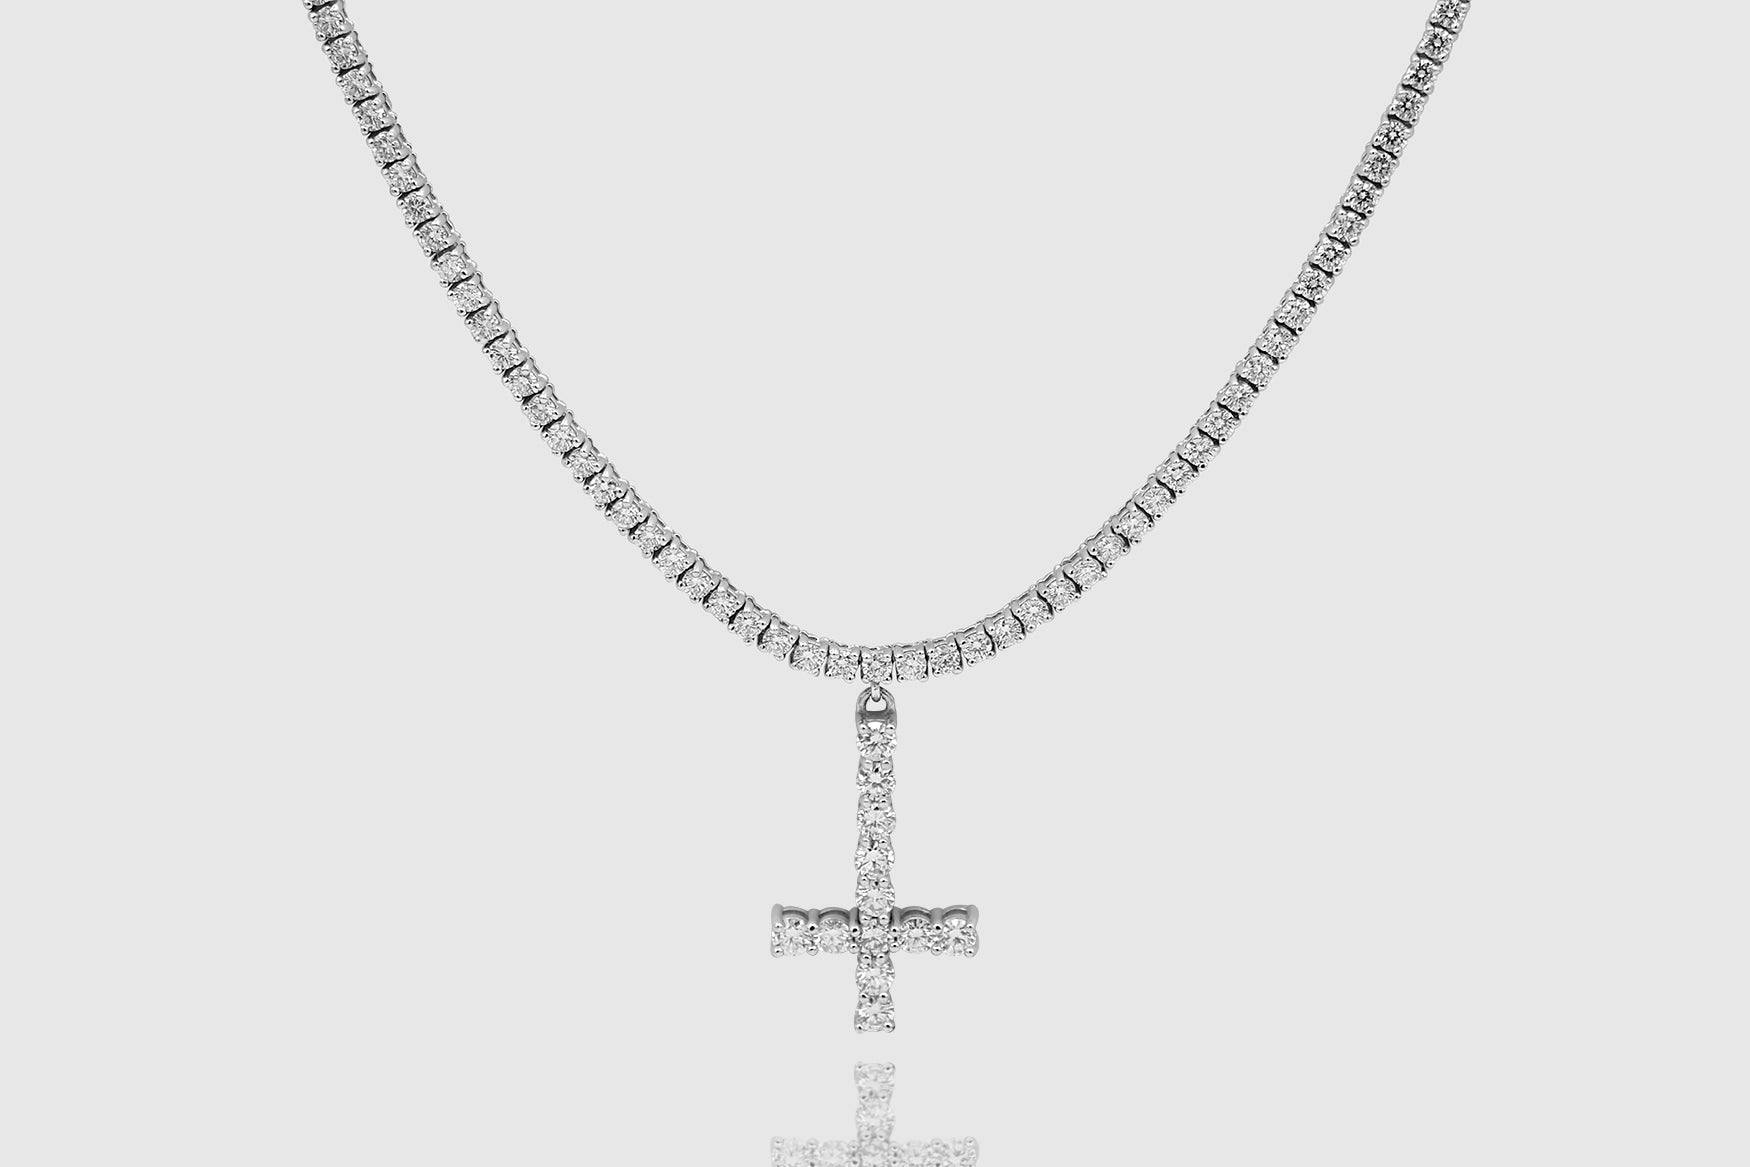 Necklace CURVED Inverted Cross Pendant Stainless Chain Upside Down Satanic  NEW | eBay